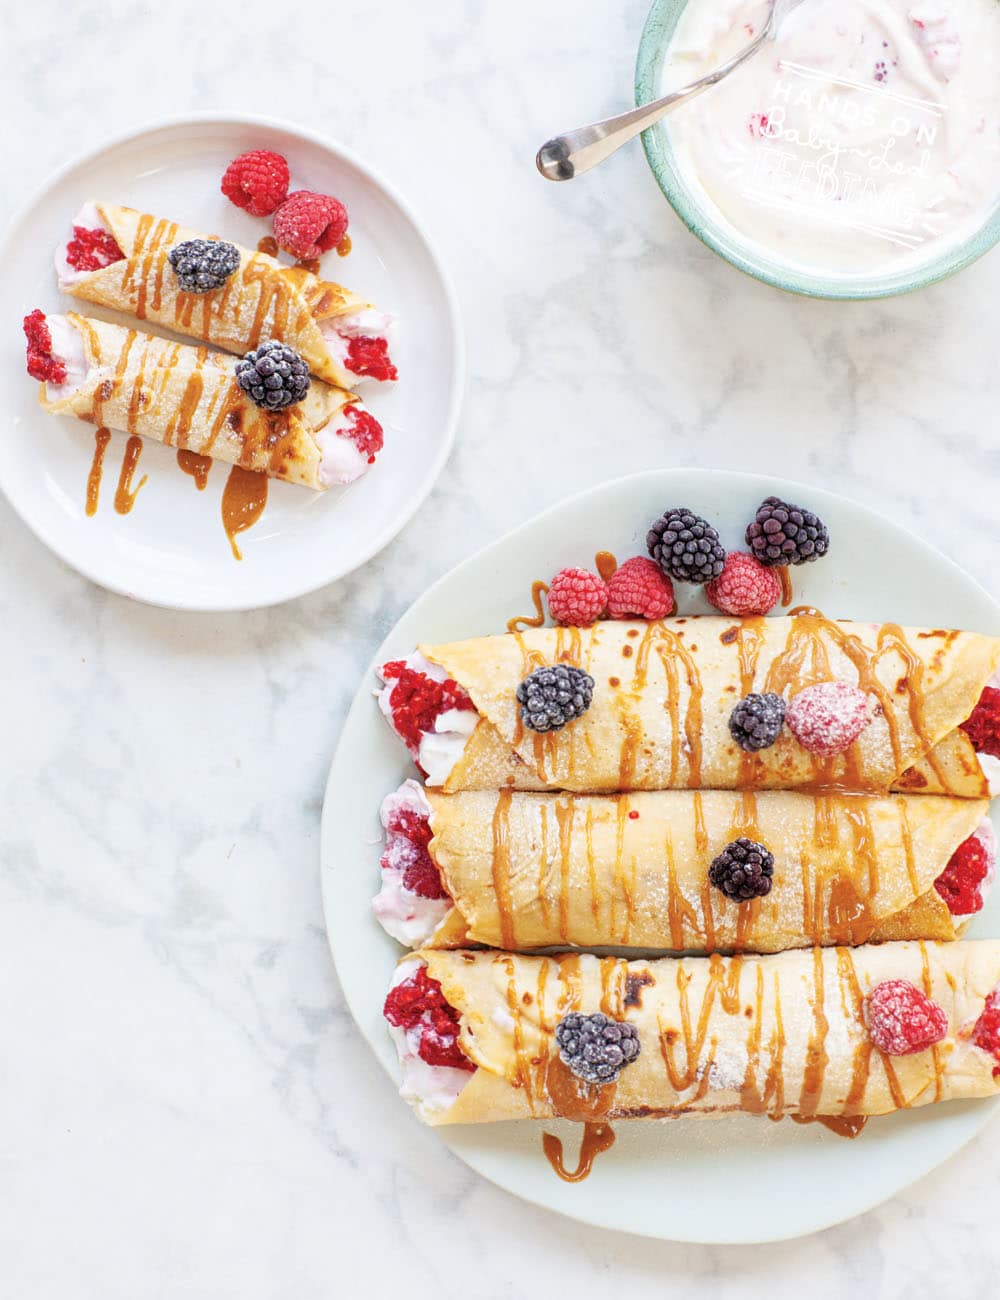 Baby Led Weaning Crepes with Berries and Yogurt - Baby Led Feeding